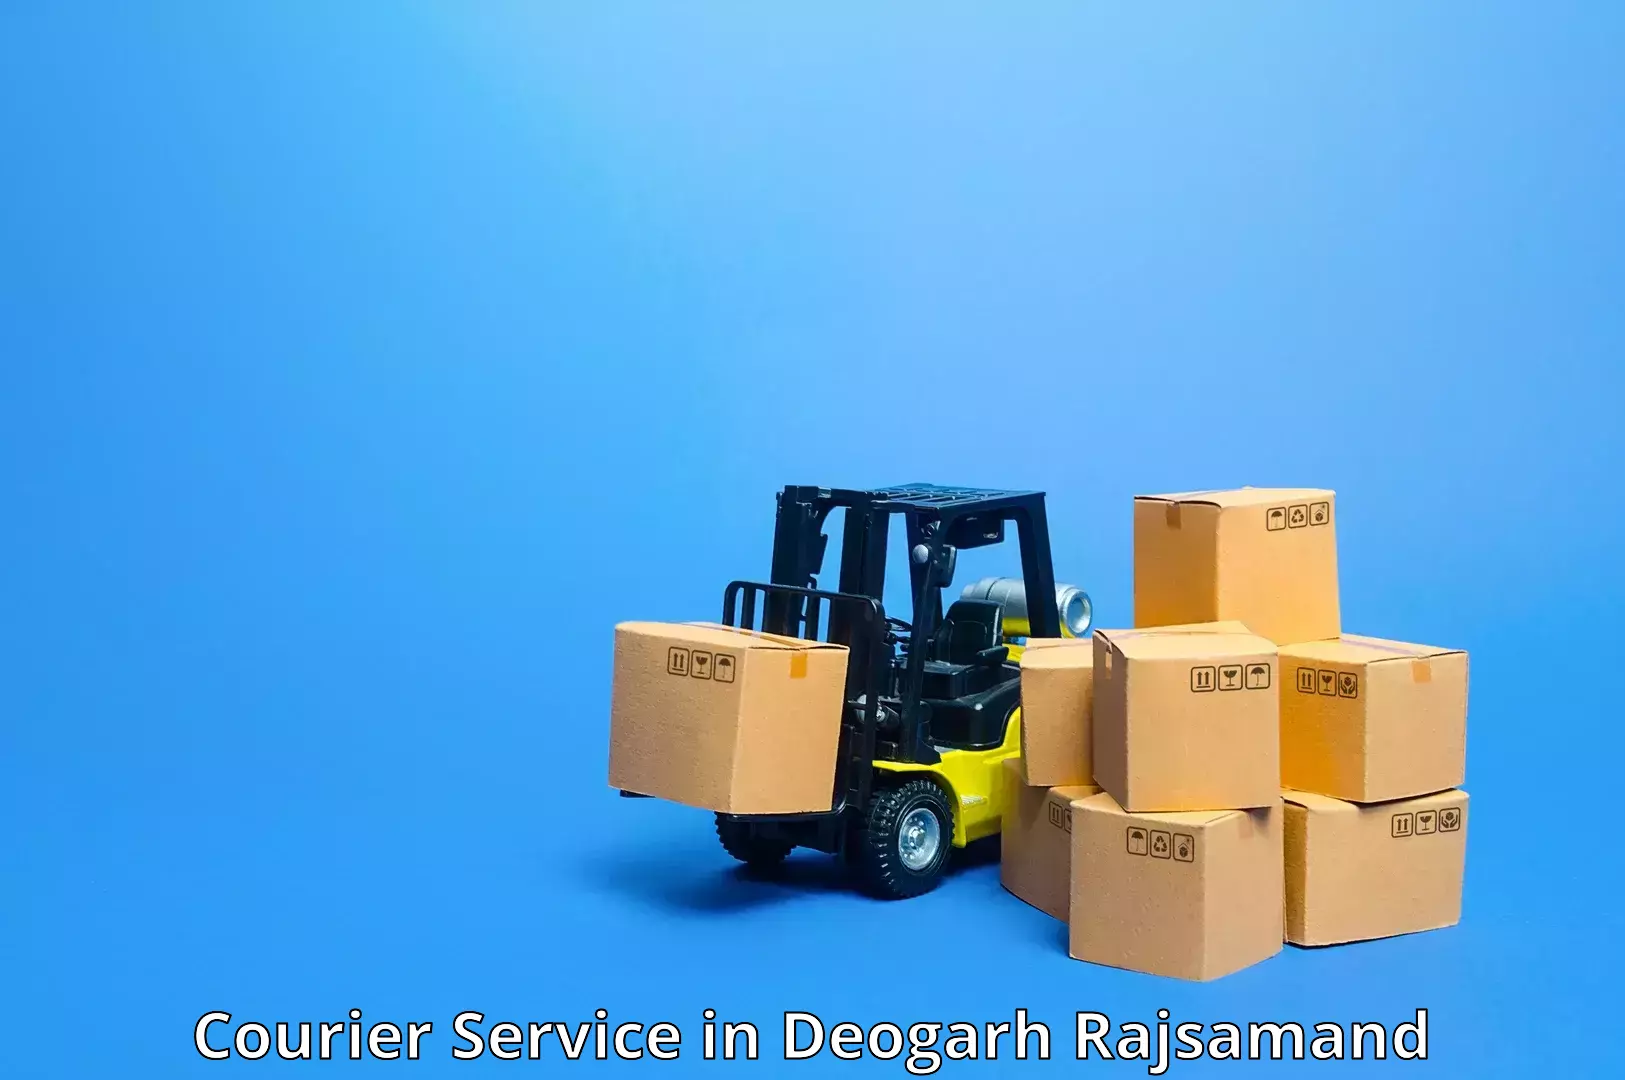 Large-scale shipping solutions in Deogarh Rajsamand